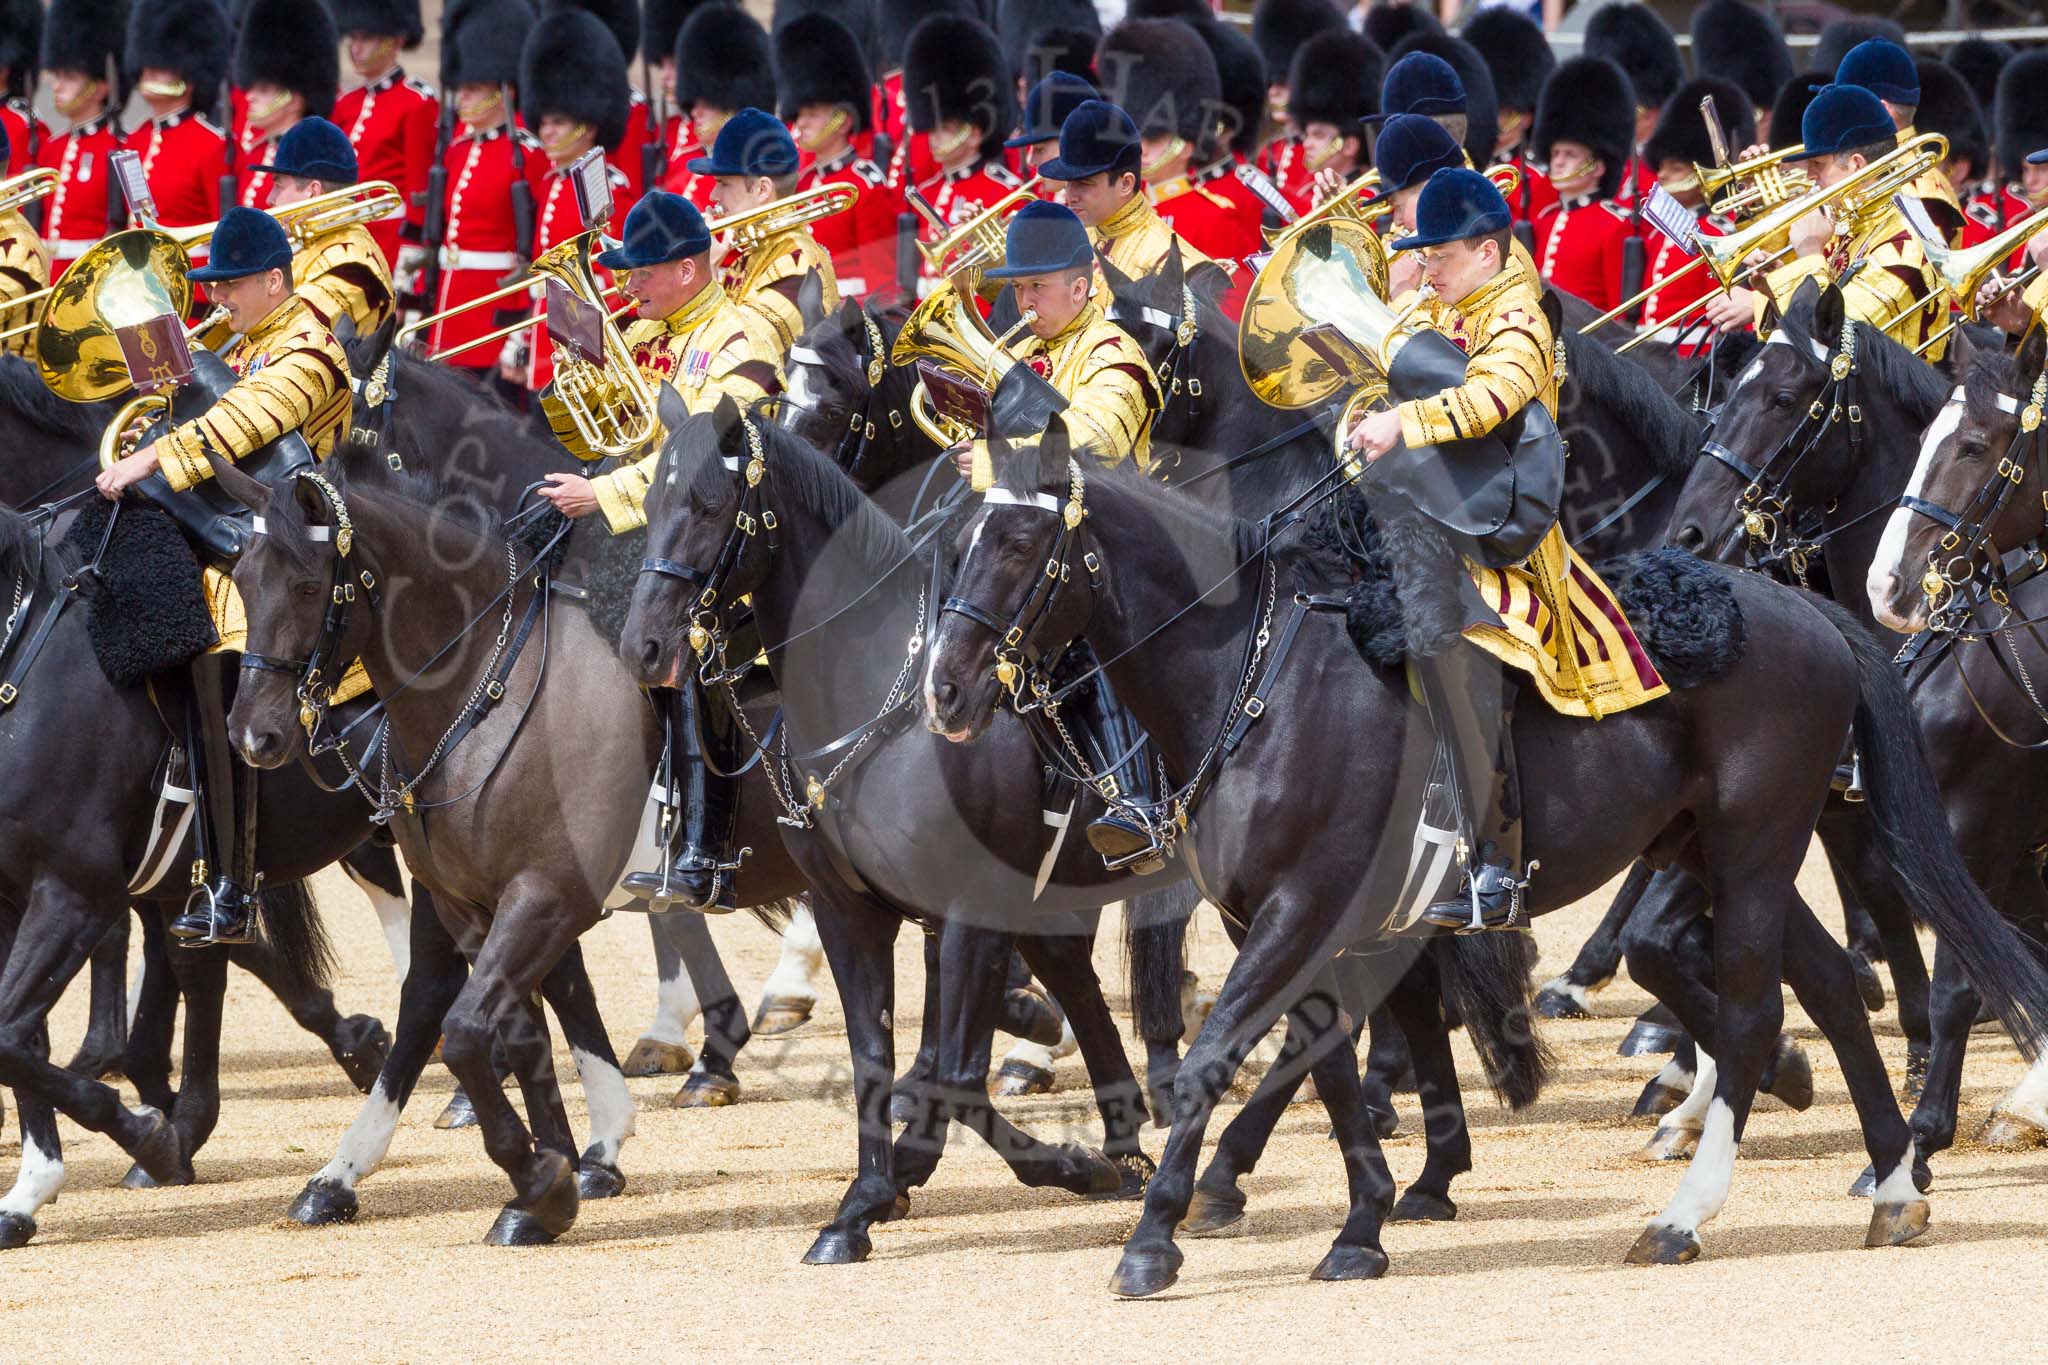 The Colonel's Review 2015.
Horse Guards Parade, Westminster,
London,

United Kingdom,
on 06 June 2015 at 11:50, image #469